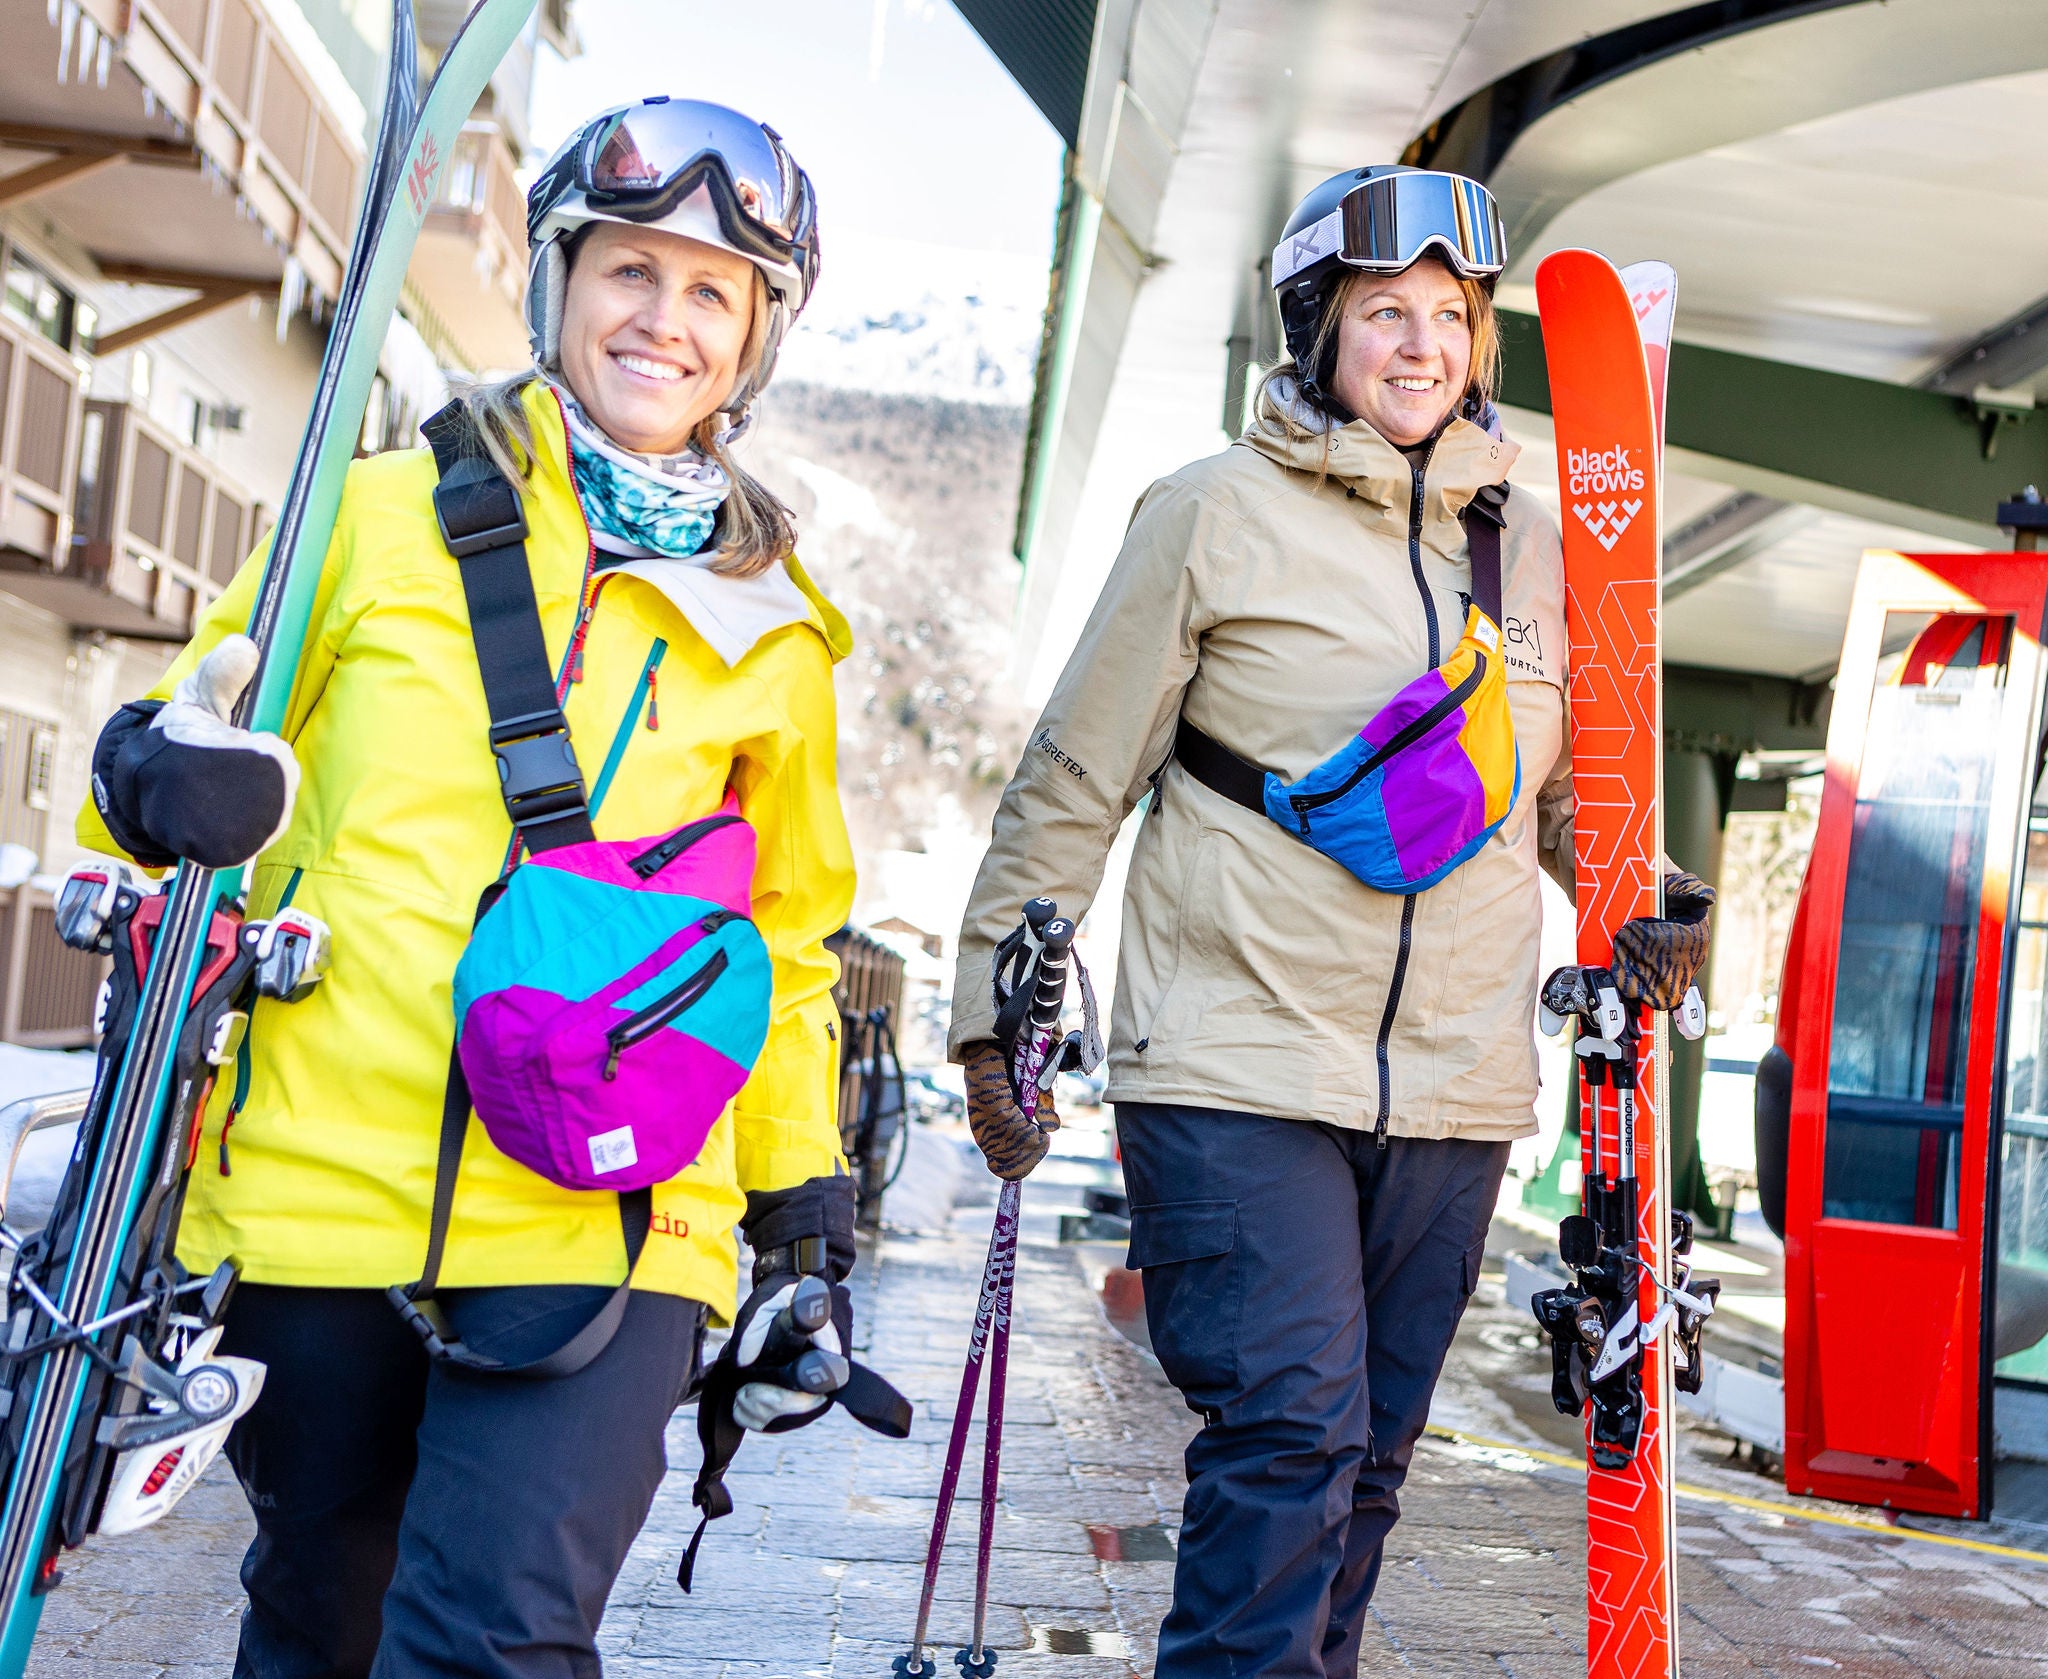 Two women carrying skis wearing colorful bags made from recycled ski gear